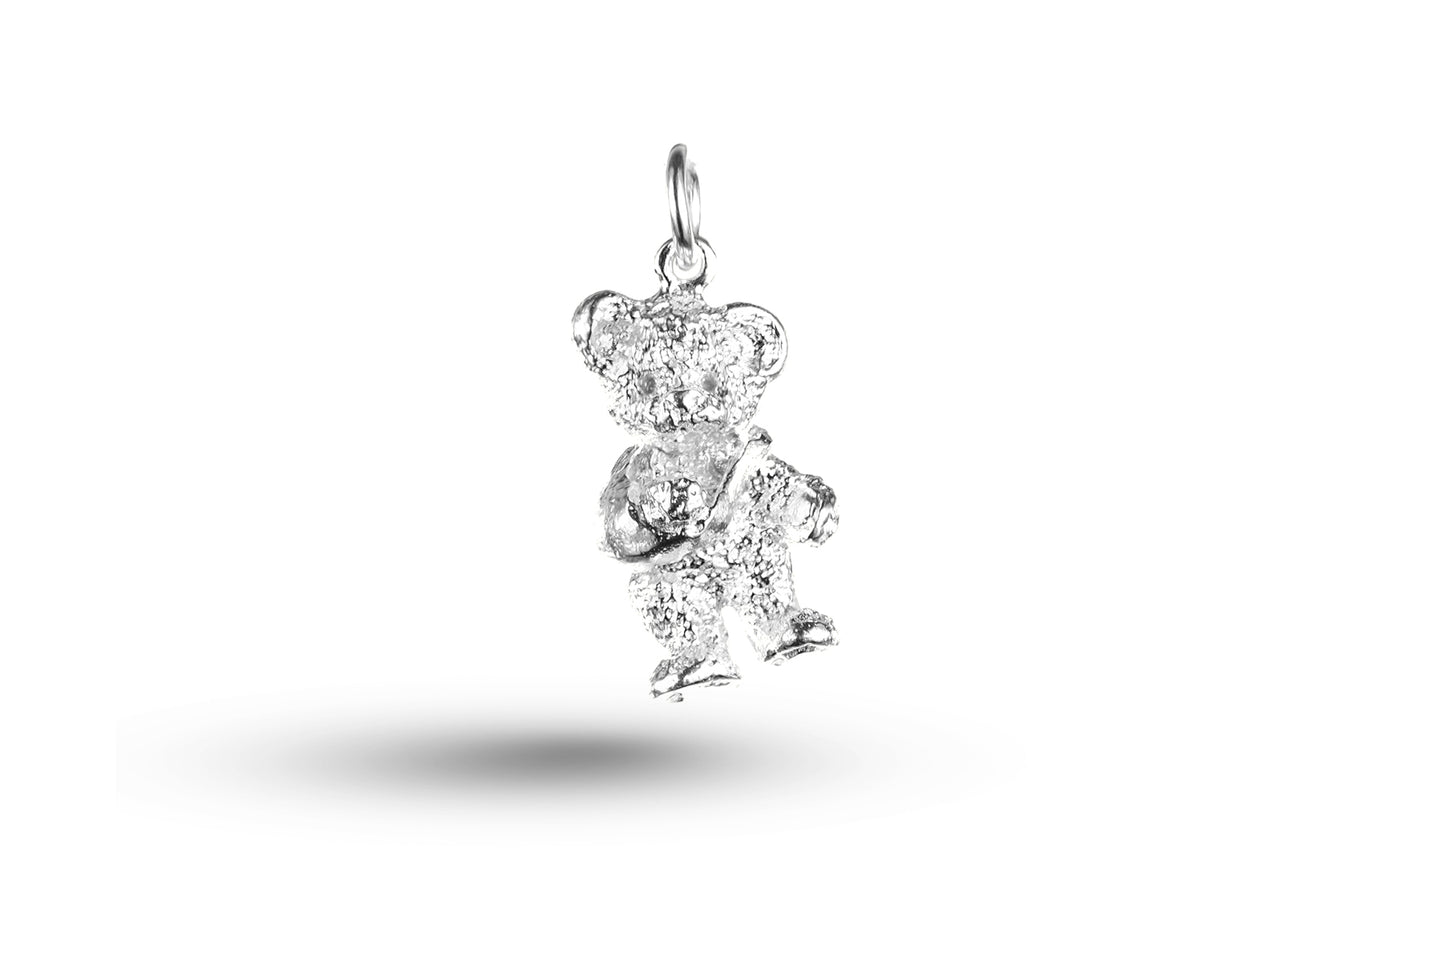 White gold Teddy with Arm in Sling charm.